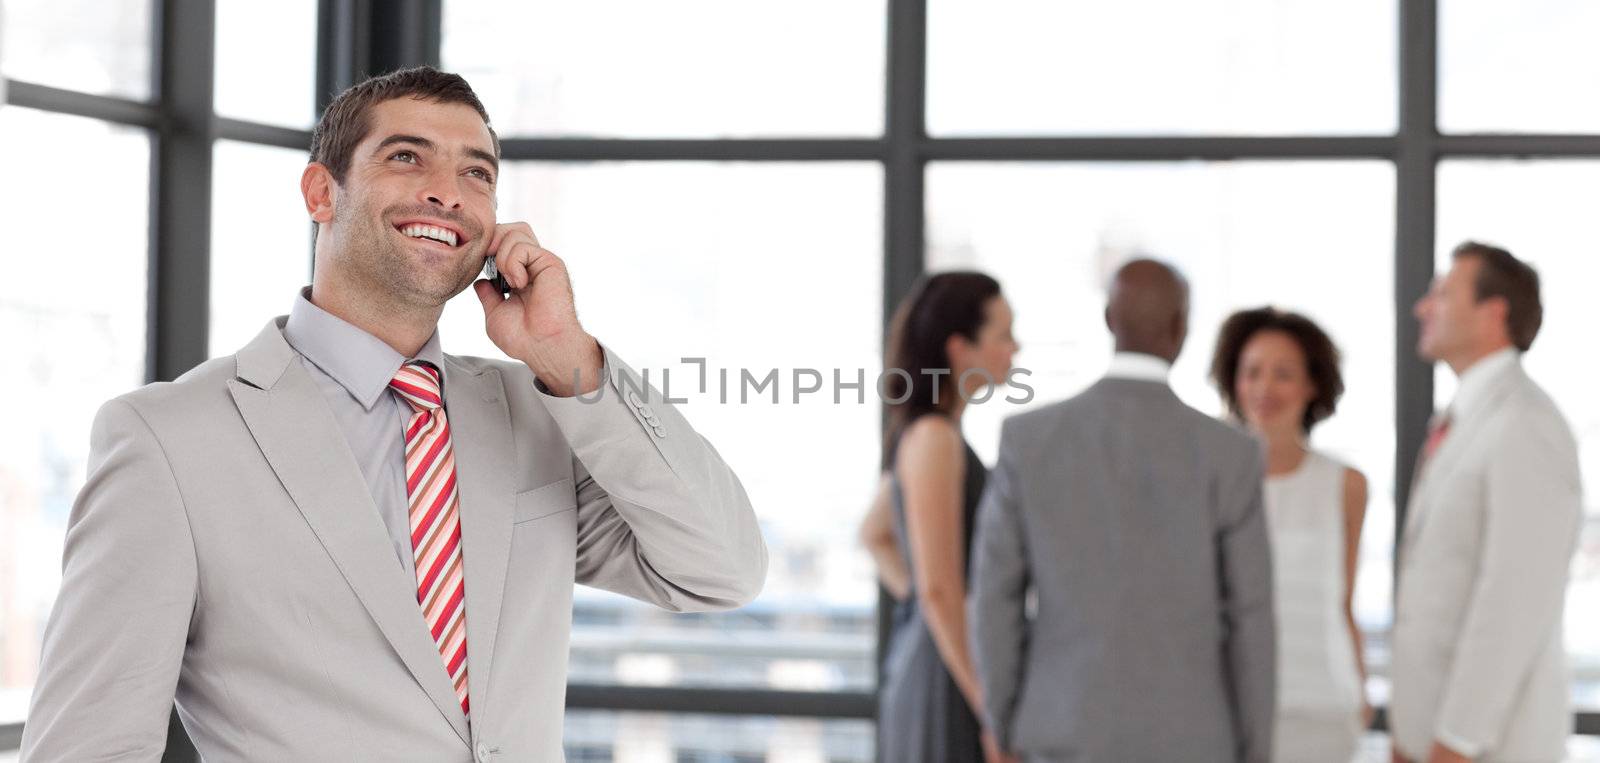 Dynamic businessman holding a phone at workplace with his colleagues in the background